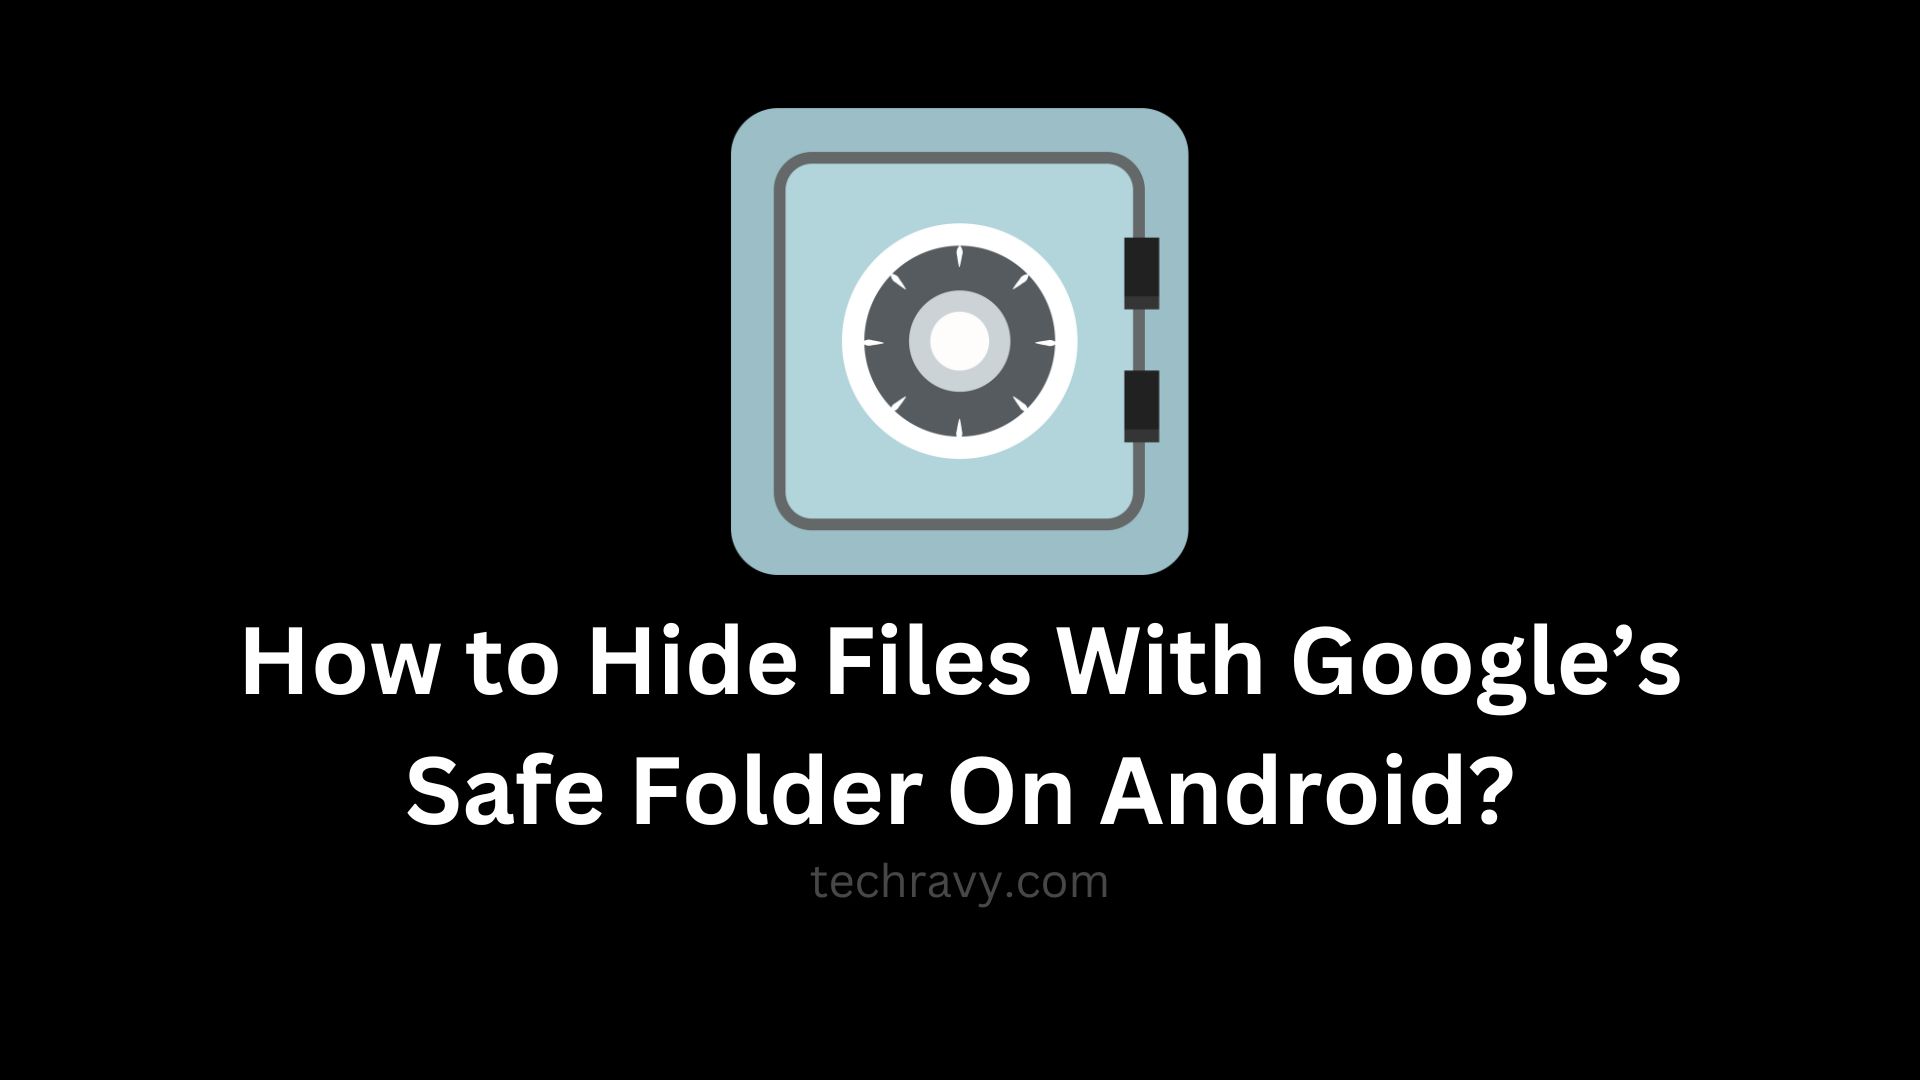 How to Hide Files With Google’s Safe Folder On Android